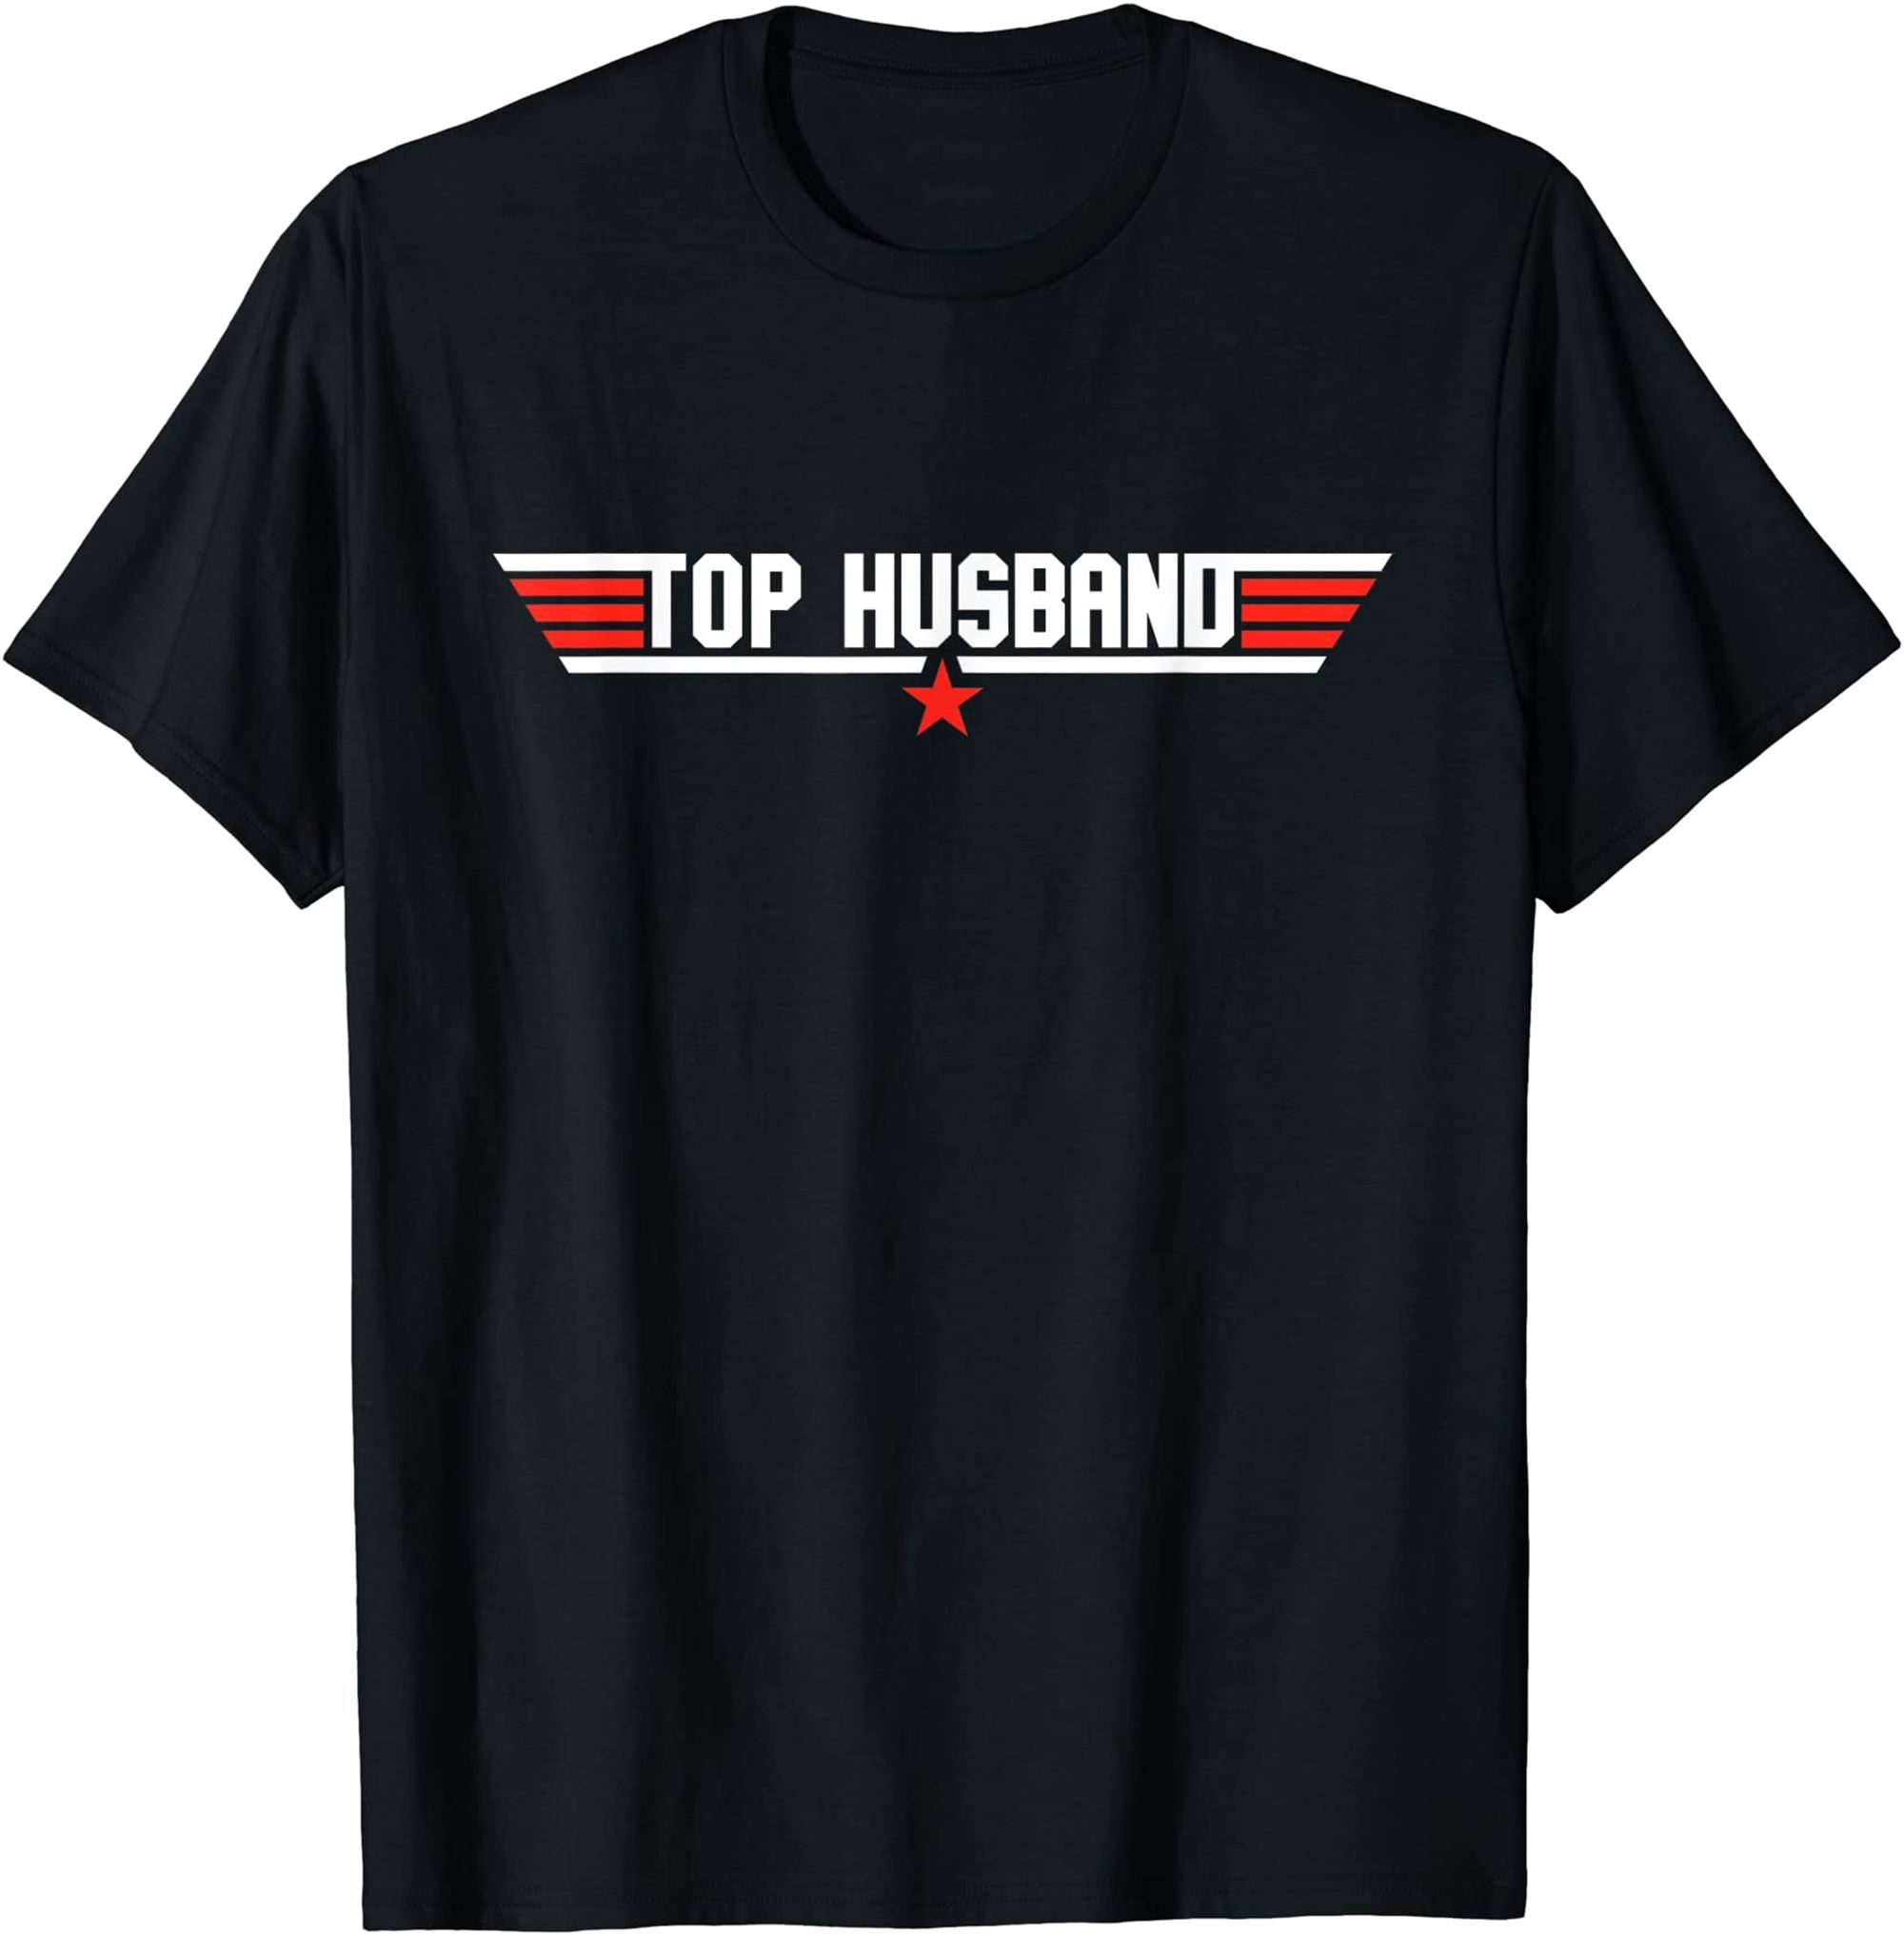 Mens Top Husband Funny Cool 80s 1980s Grandpa Dad Fathers Day T-shirt Plus Size Up To 5xl